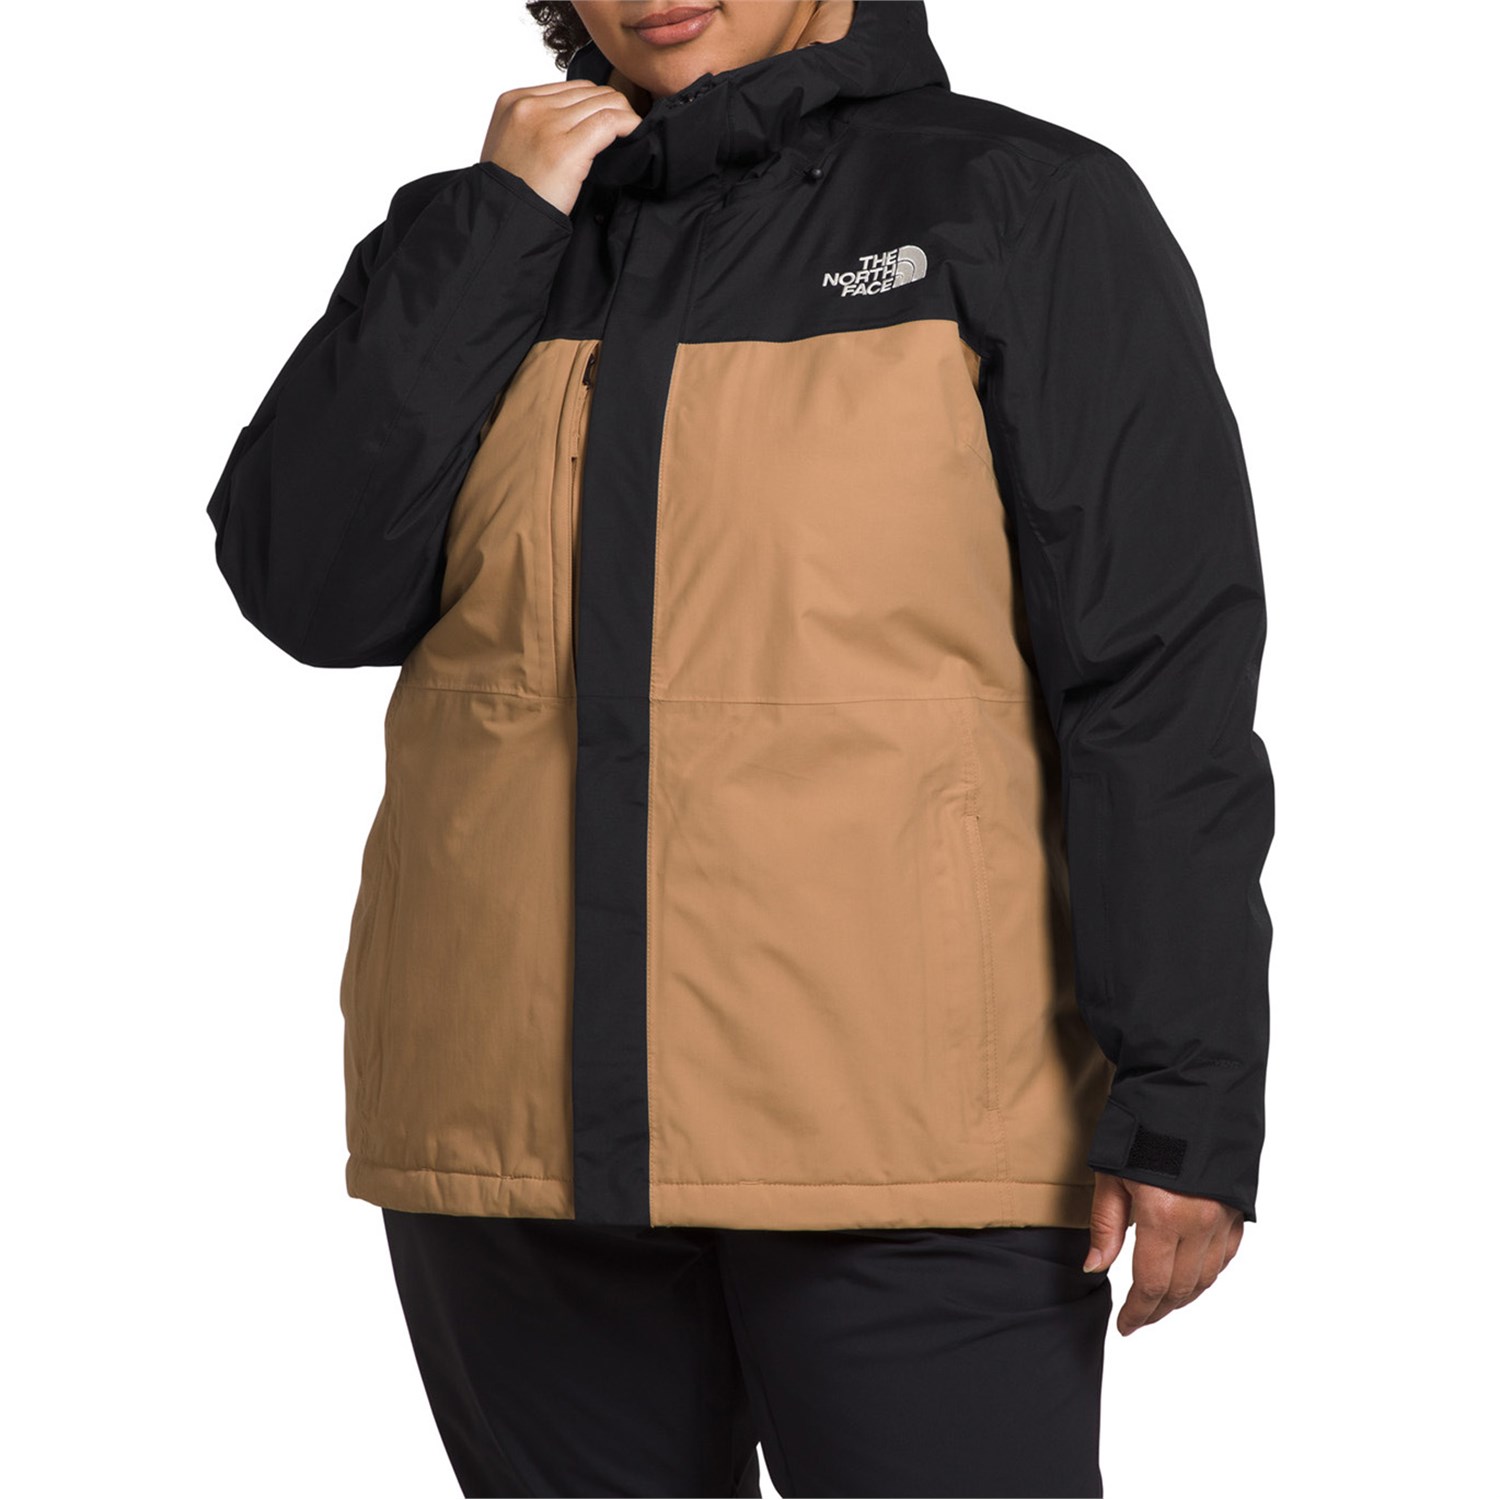 Куртка The North Face Freedom Insulated Plus, цвет TNF Black/Almond Butter куртка the north face freedom insulated plus цвет tnf black almond butter